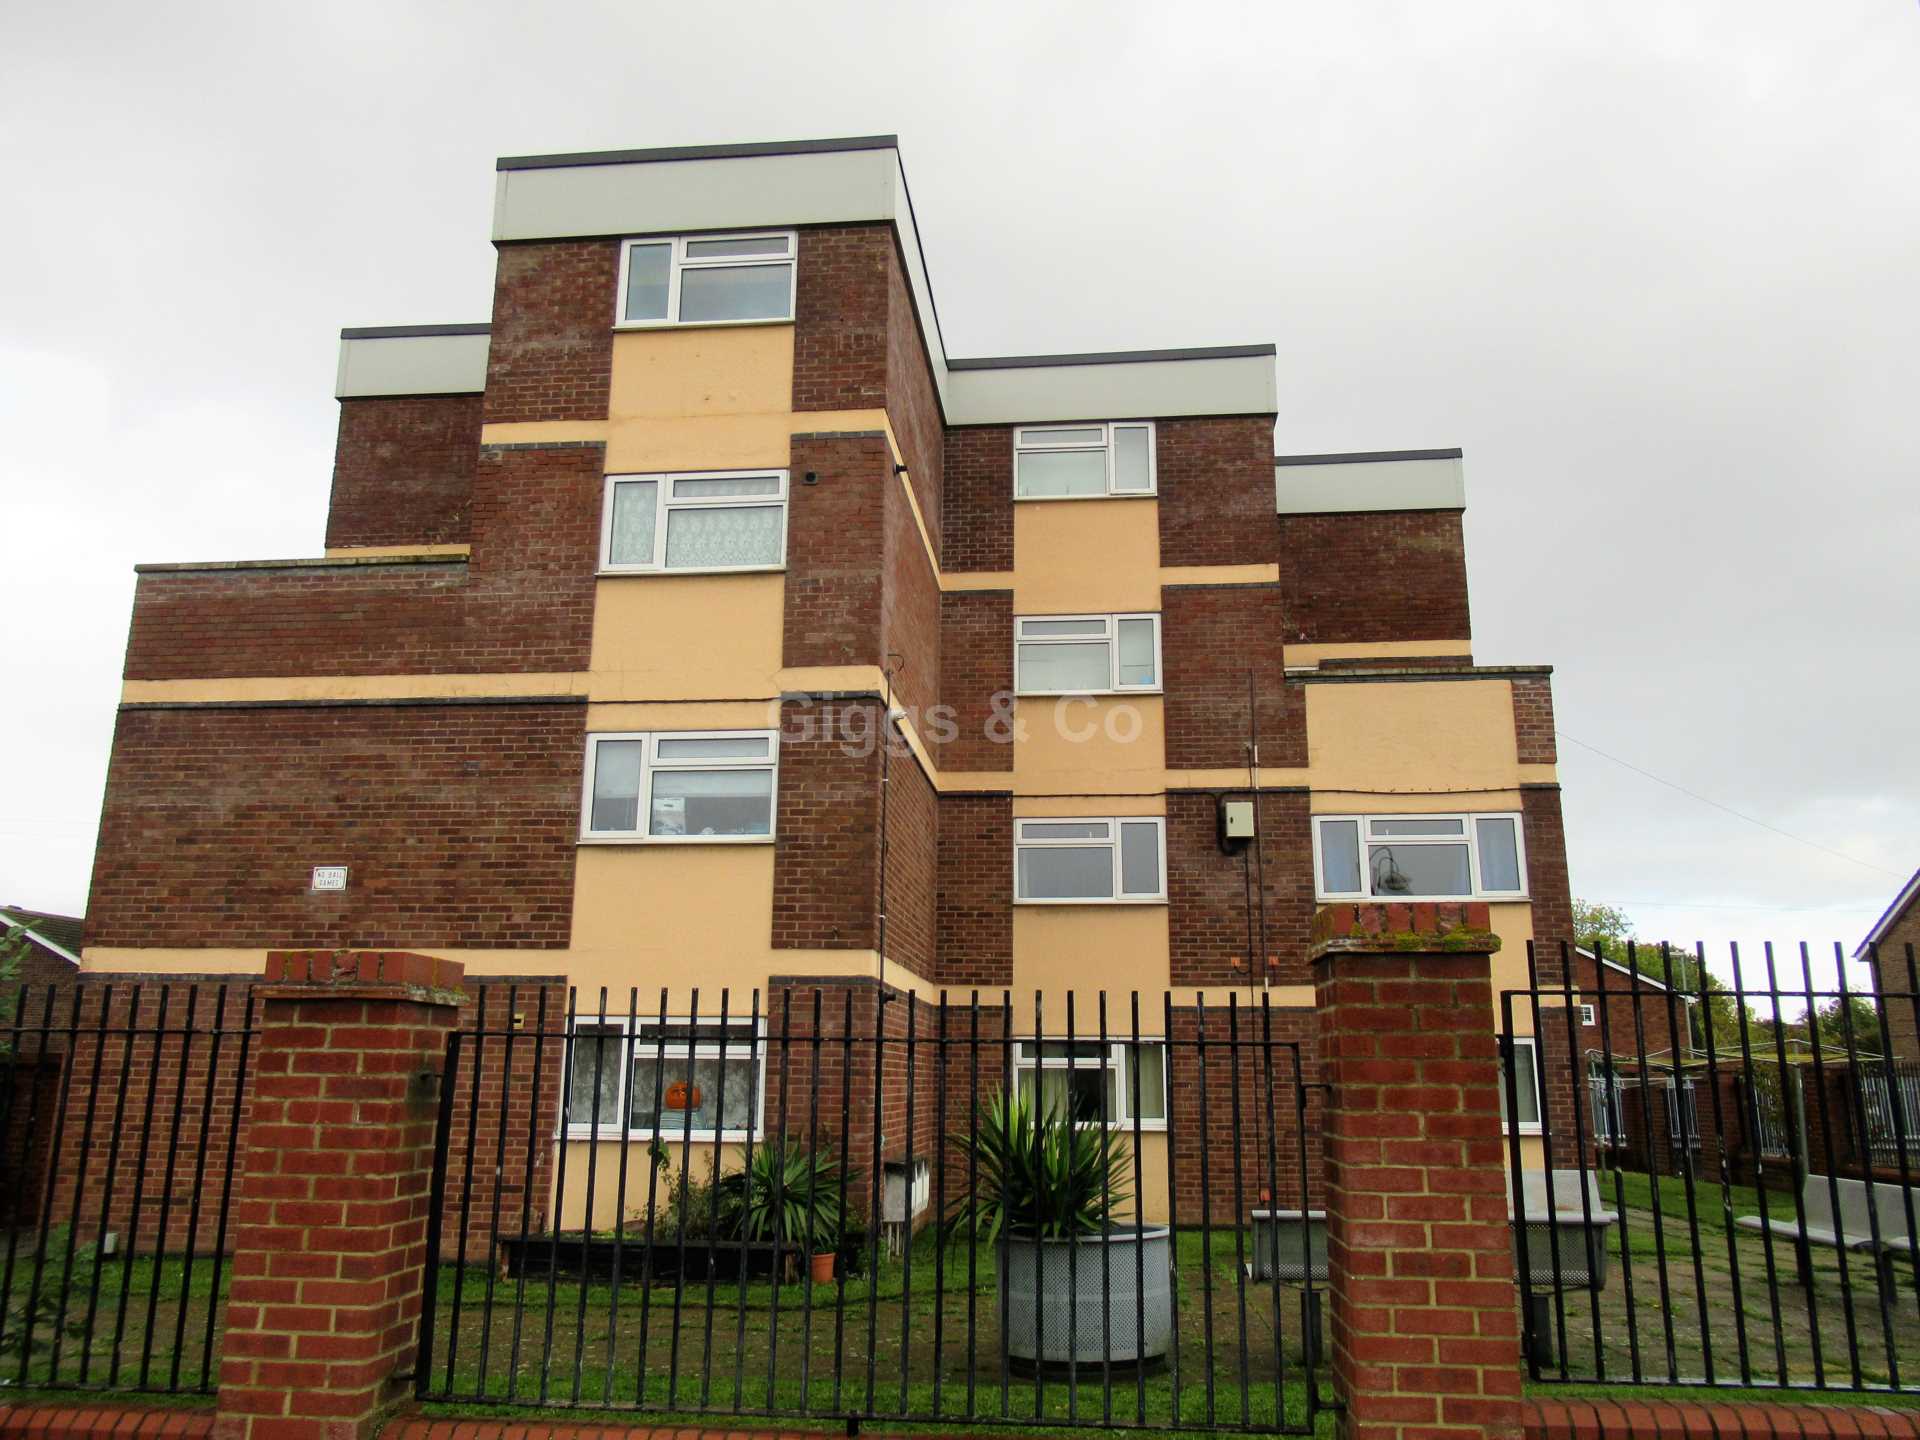 1 bed flat to rent in Duck Lane, St Neots, PE19